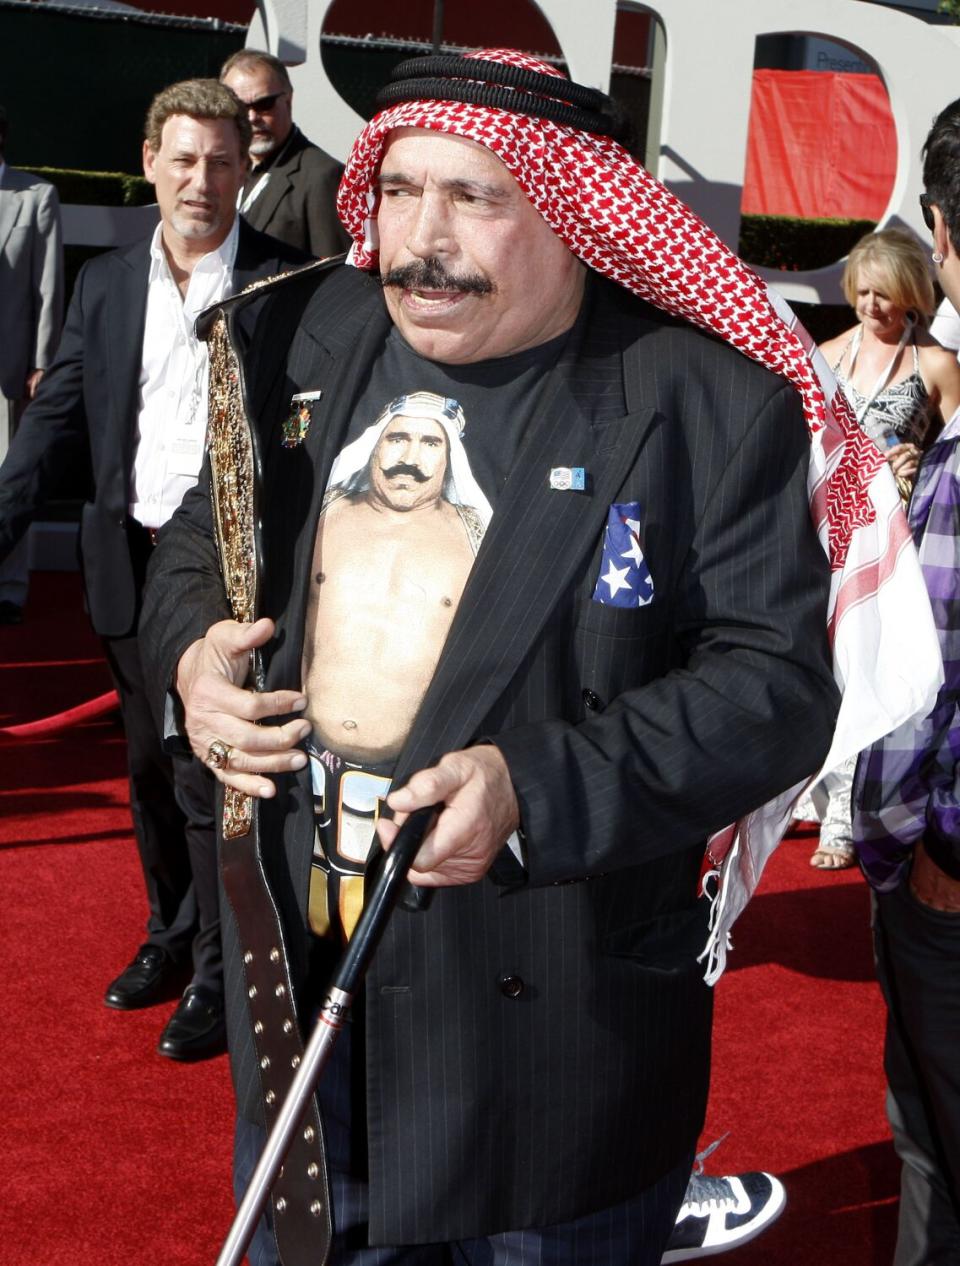 Iron Sheik arrives at the ESPY Awards in 2009 in Los Angeles.